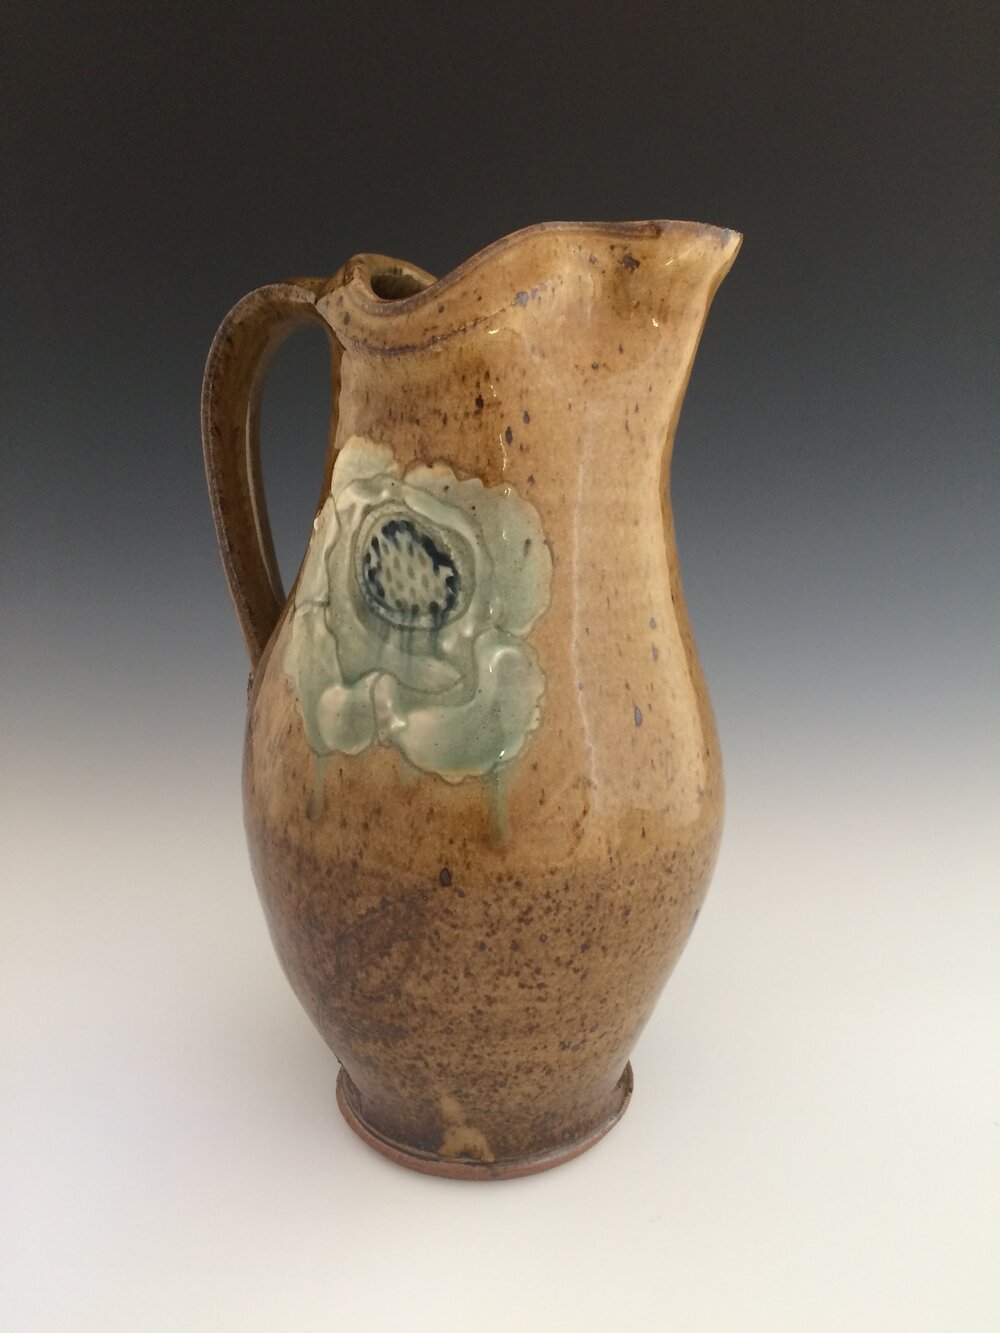 Pitcher made in a two week workshop at Anderson Ranch Art Center with Josh Deweese Summer 2015